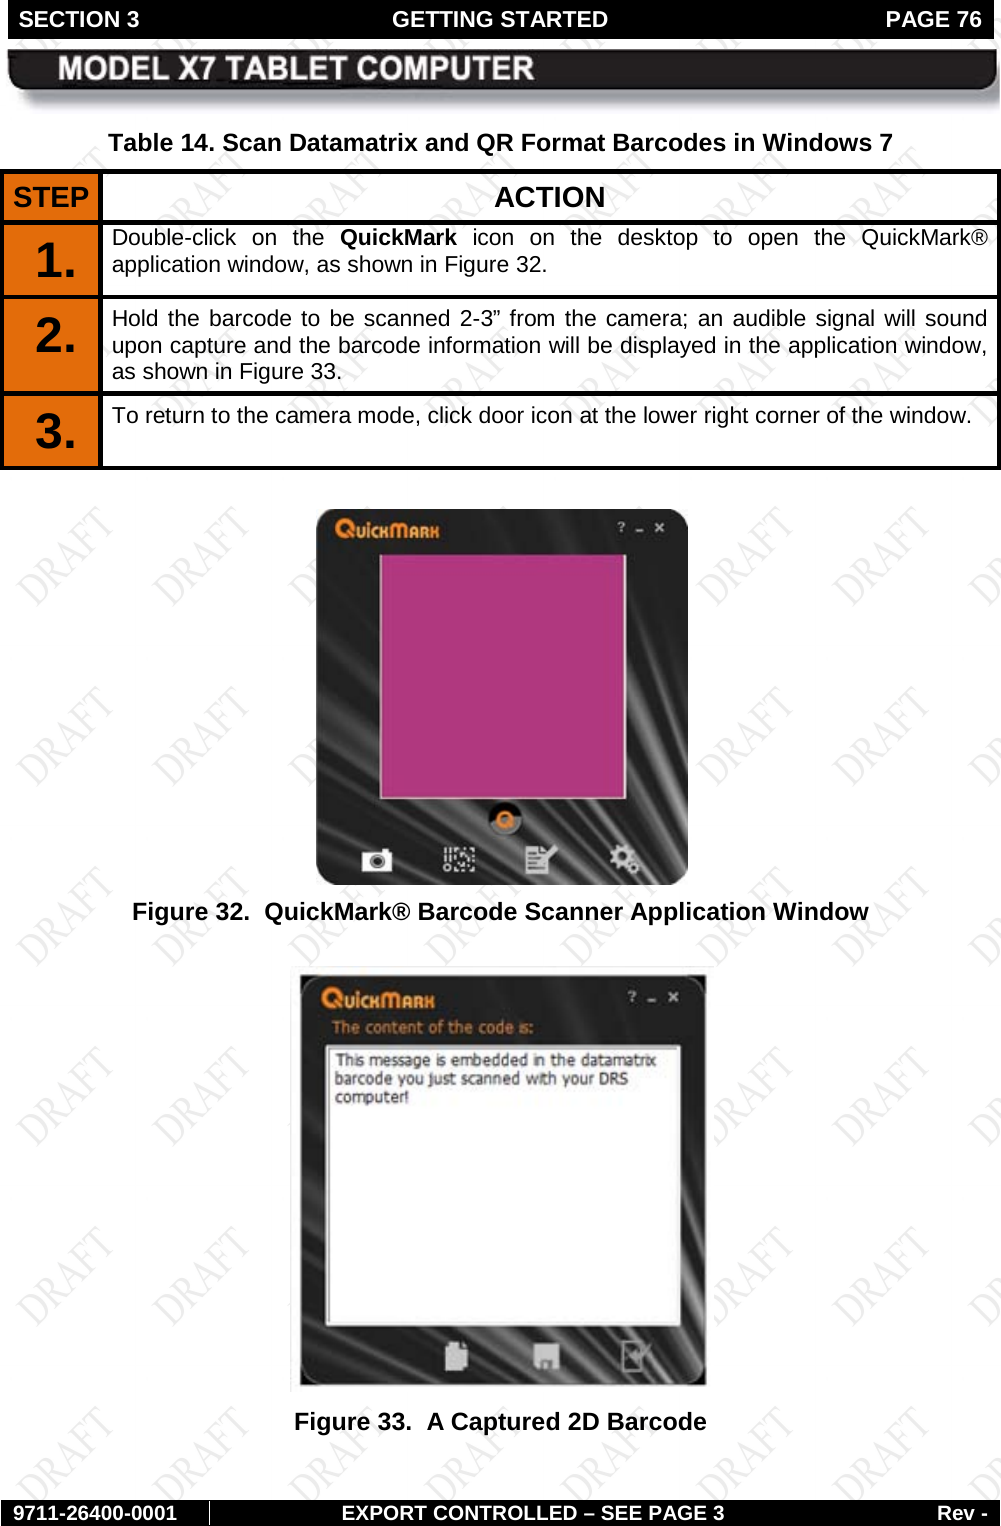 SECTION 3 GETTING STARTED  PAGE 76        9711-26400-0001 EXPORT CONTROLLED – SEE PAGE 3 Rev - Table 14. Scan Datamatrix and QR Format Barcodes in Windows 7 STEP  ACTION 1.  Double-click on the QuickMark icon on the desktop to open the QuickMark® application window, as shown in Figure 32. 2.  Hold the barcode to be scanned 2-3” from the camera; an audible signal will sound upon capture and the barcode information will be displayed in the application window, as shown in Figure 33. 3.  To return to the camera mode, click door icon at the lower right corner of the window.   Figure 32.  QuickMark® Barcode Scanner Application Window   Figure 33.  A Captured 2D Barcode  